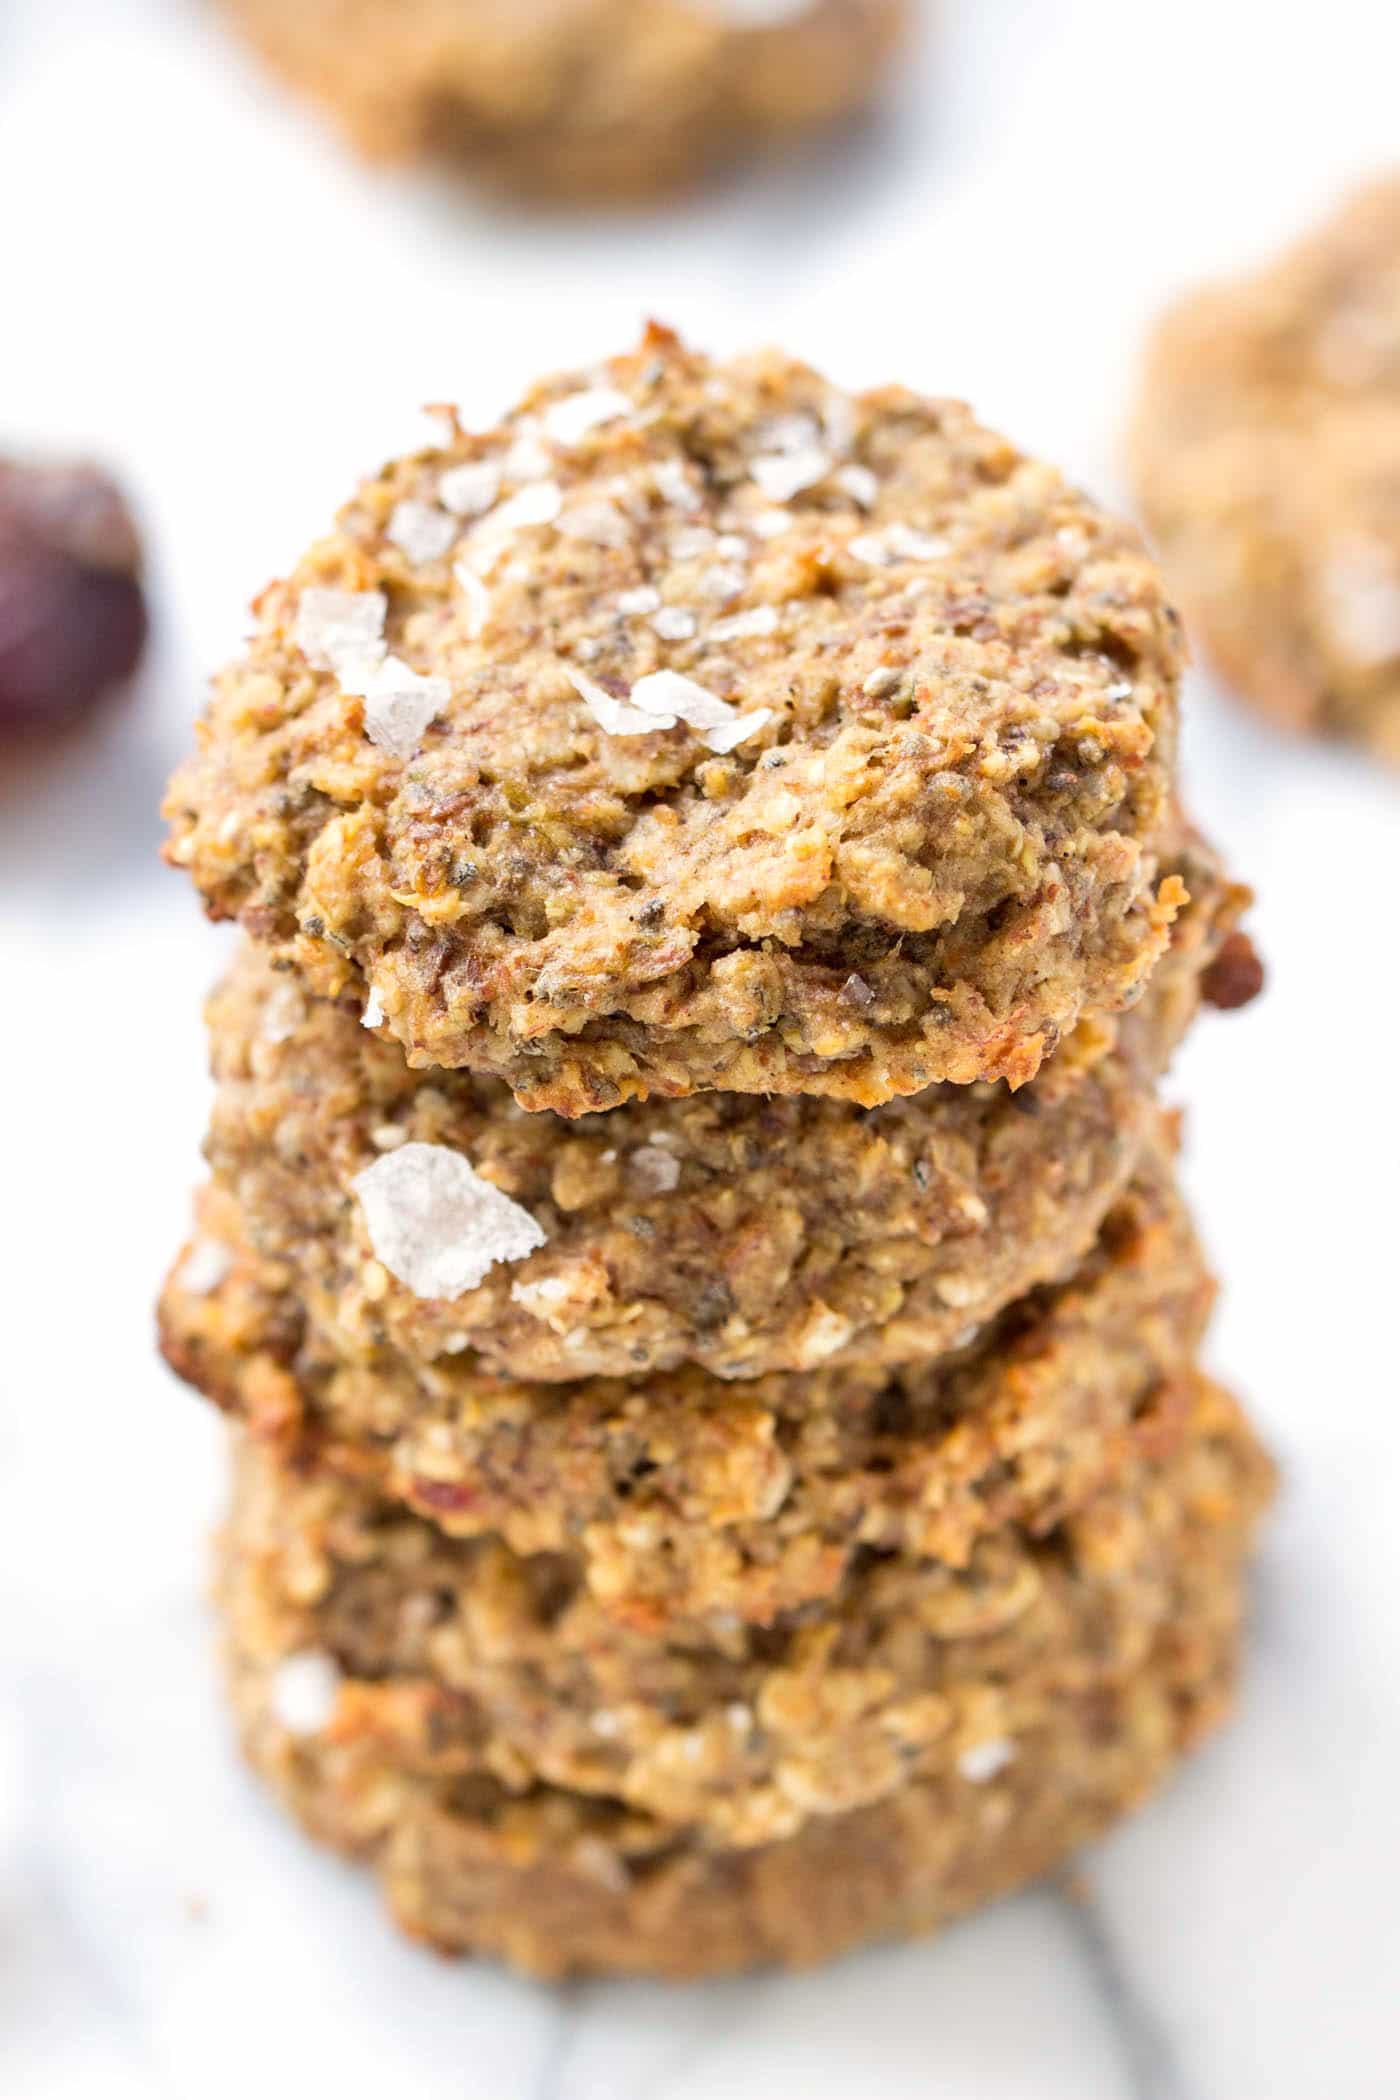 HEALTHY QUINOA BREAKFAST COOKIES -- with banana, dates, almond butter, chia seeds and more! Topped off with flaked sea salt for added flavor! [vegan + gluten-free]